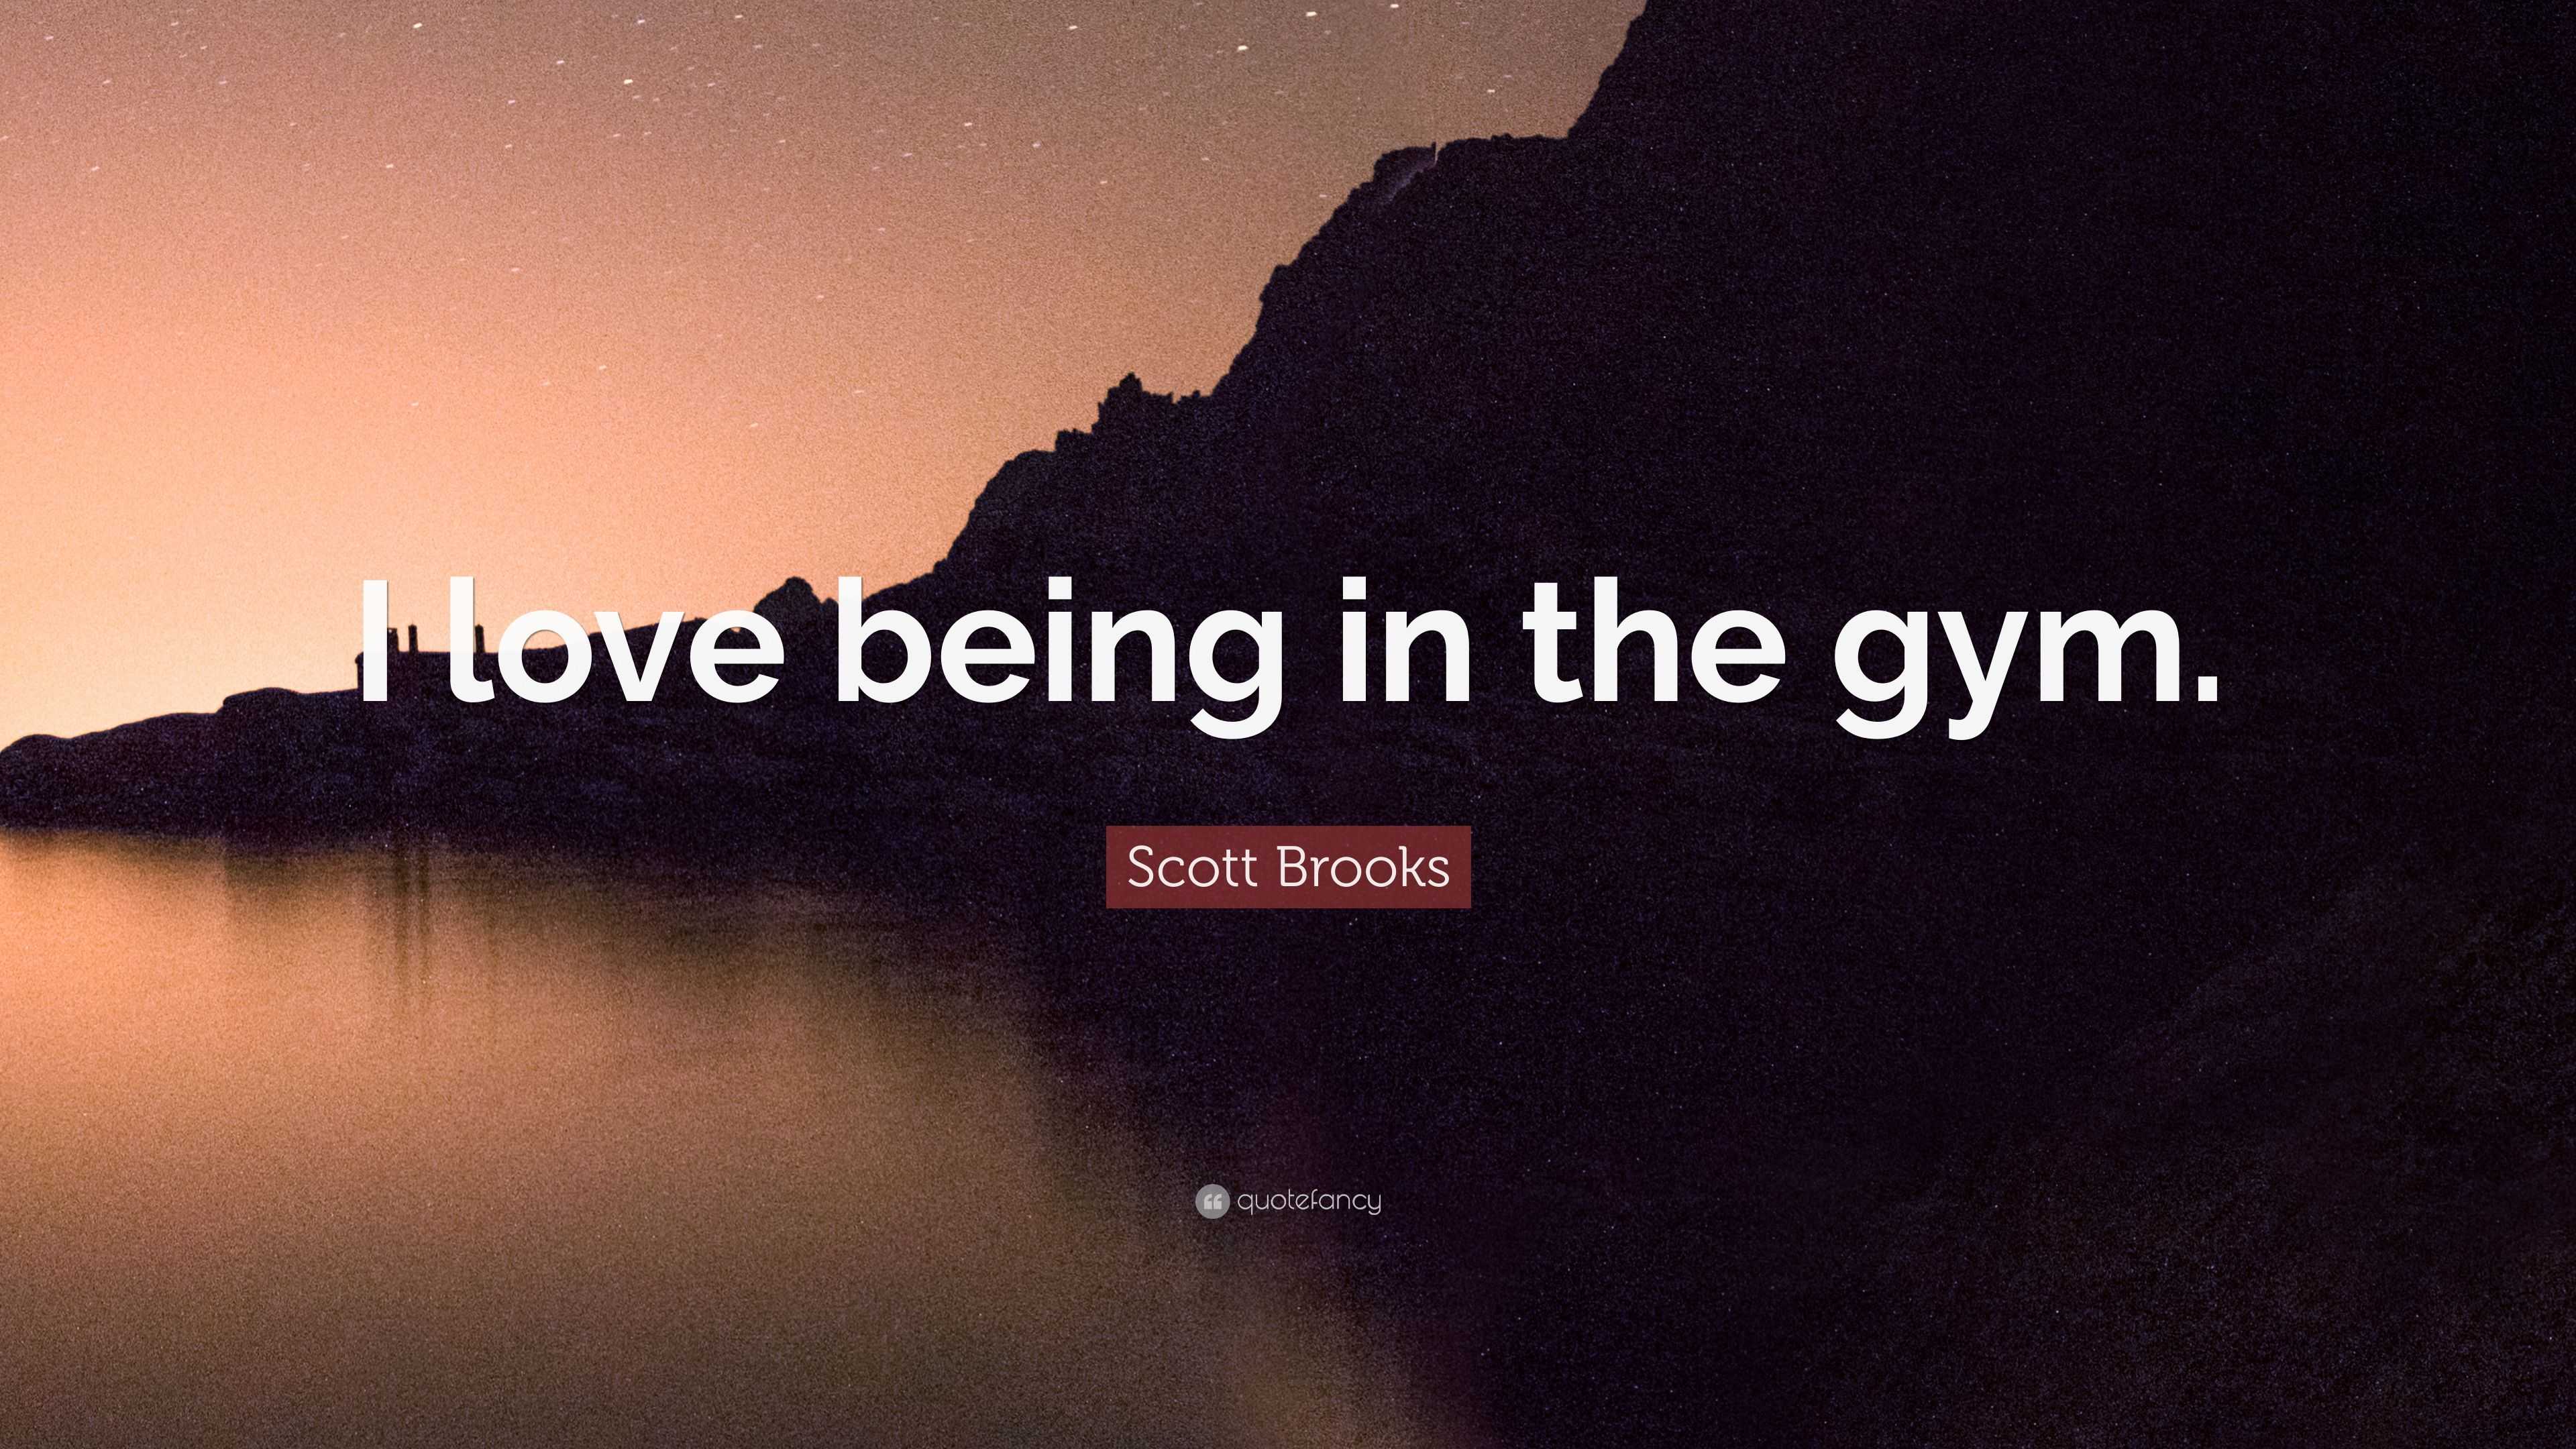 Scott Brooks Quote: “I love being in the gym.”